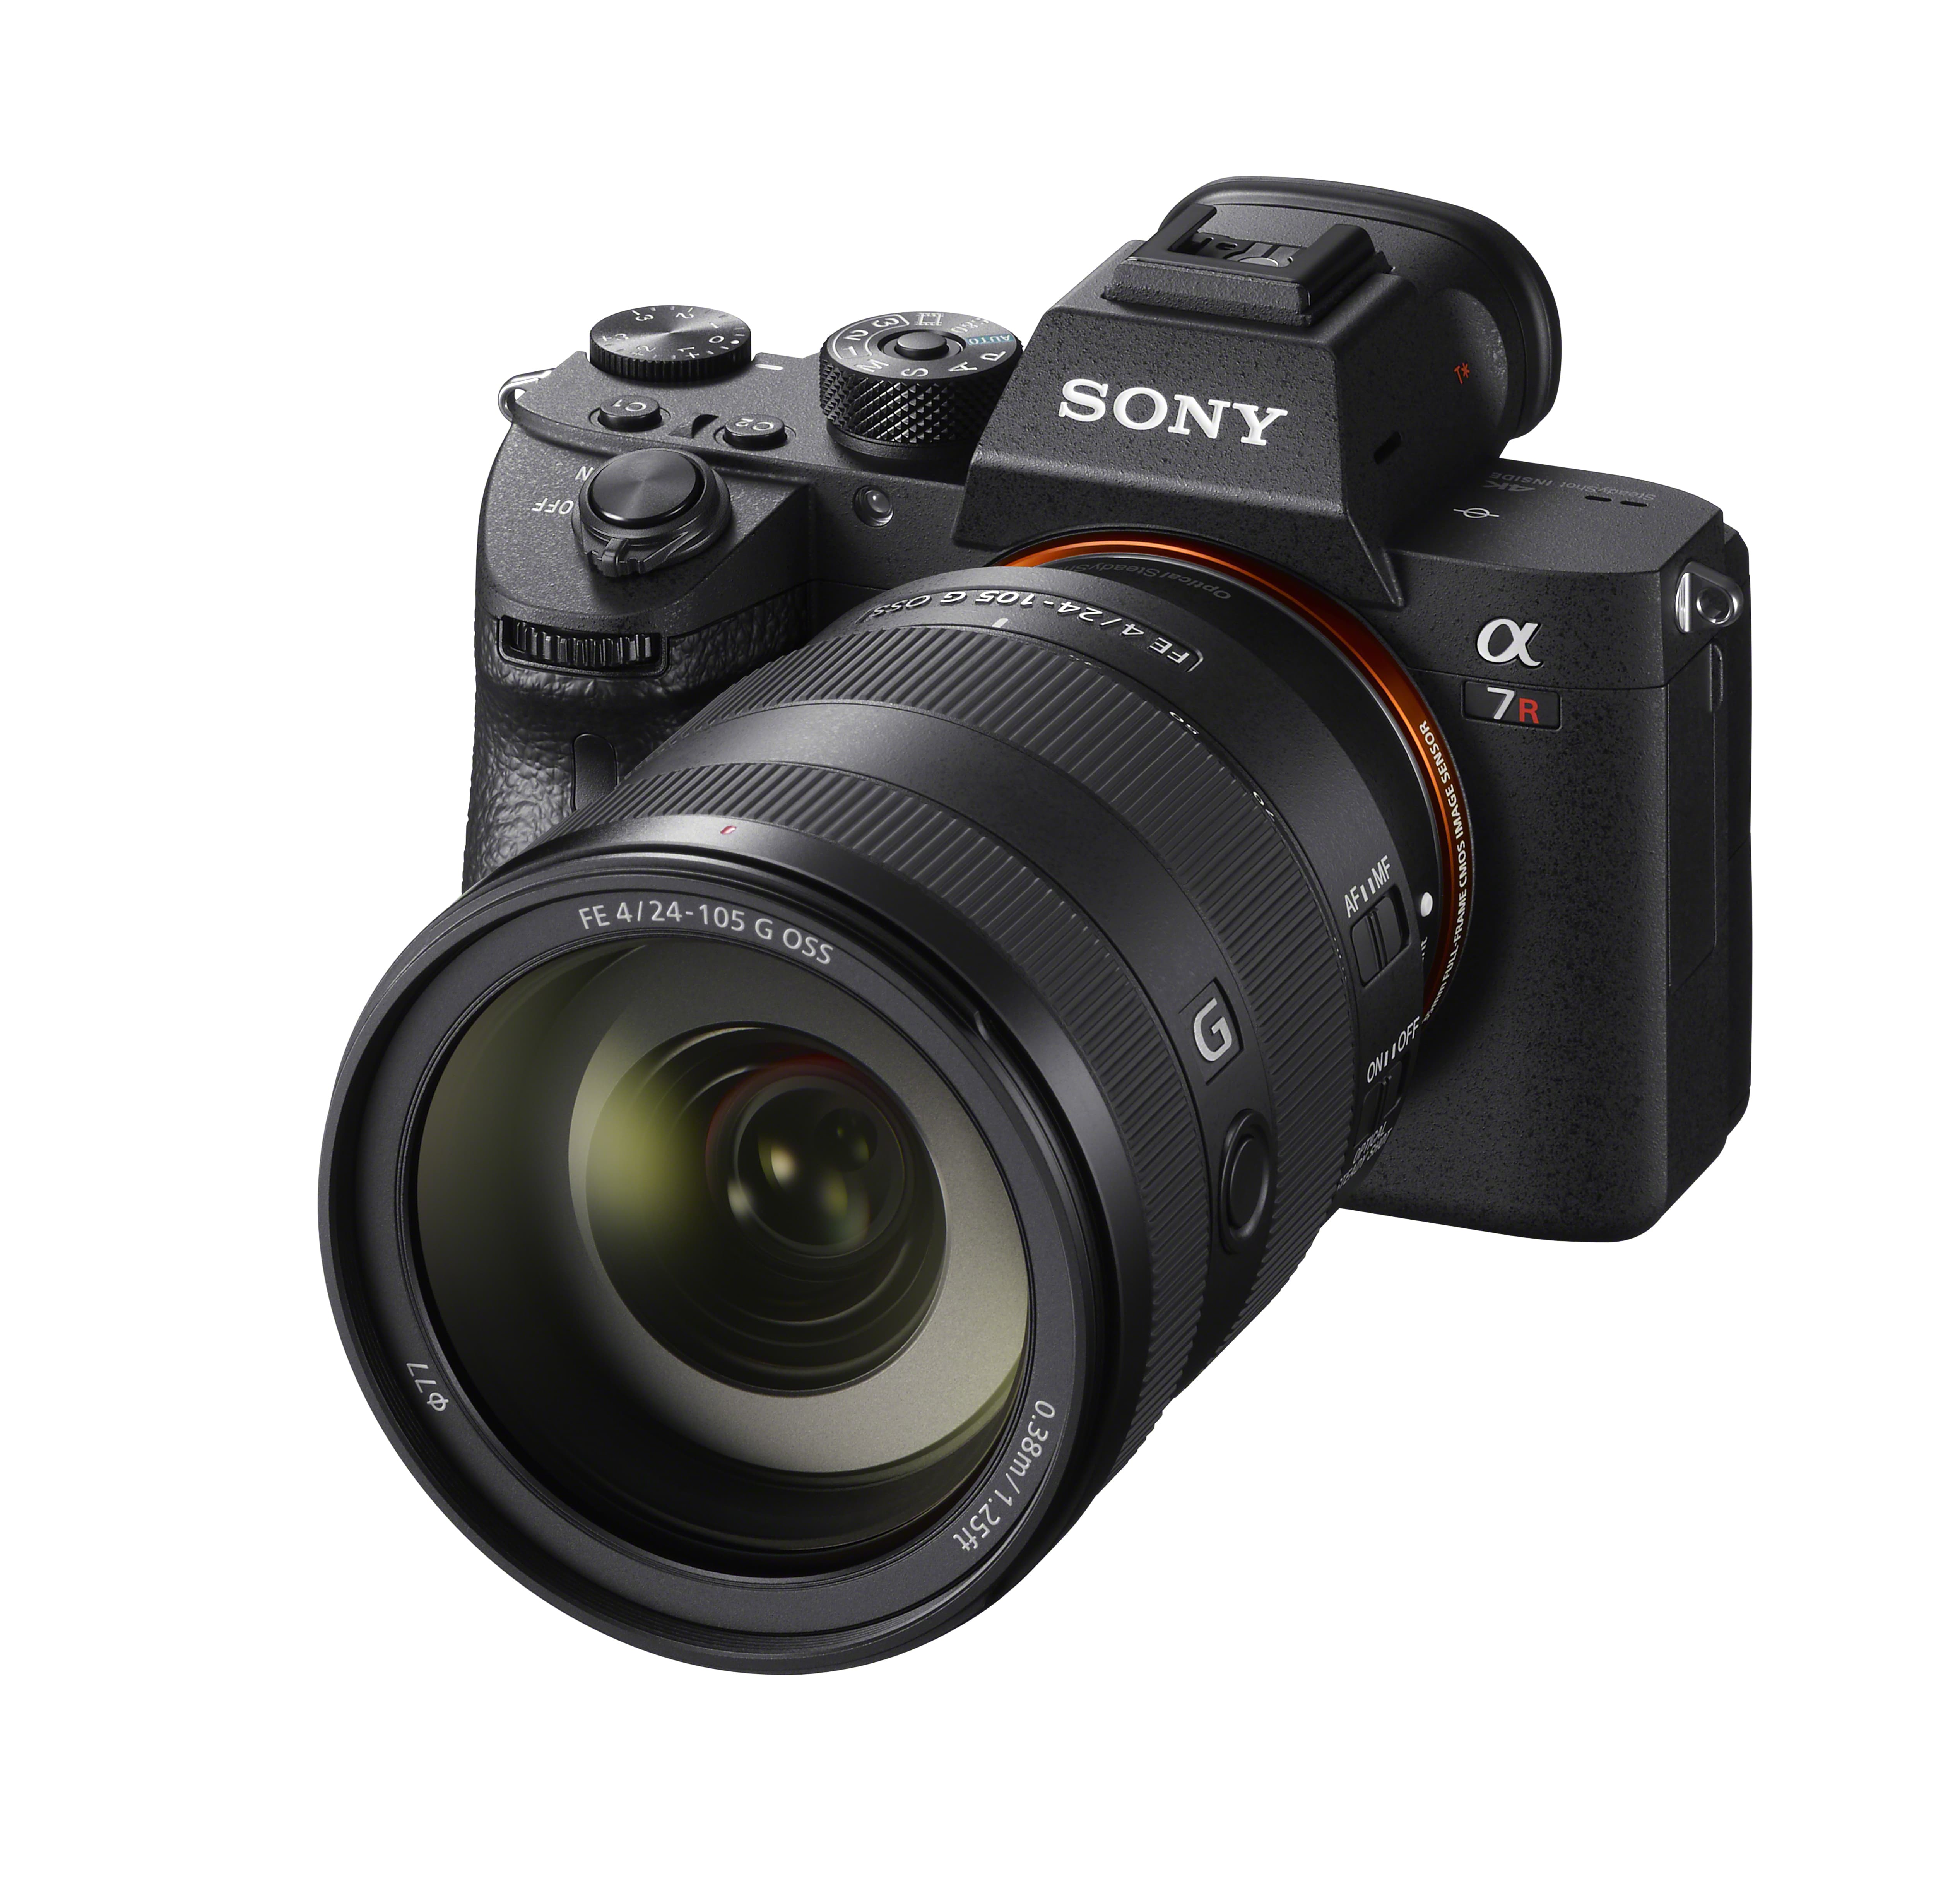 First Hands-On Look at the Sony a7R III